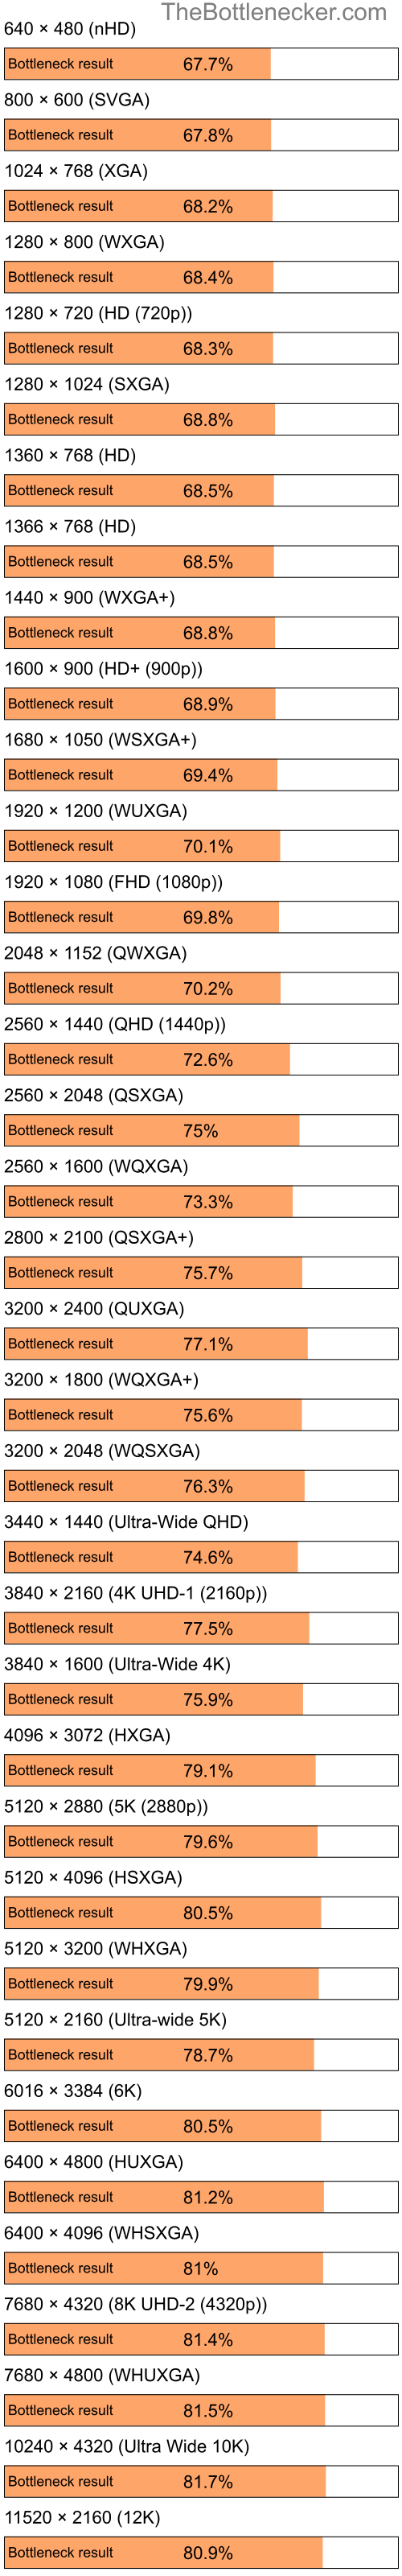 Bottleneck results by resolution for Intel Celeron M 410 and NVIDIA Quadro FX 3000 in General Tasks